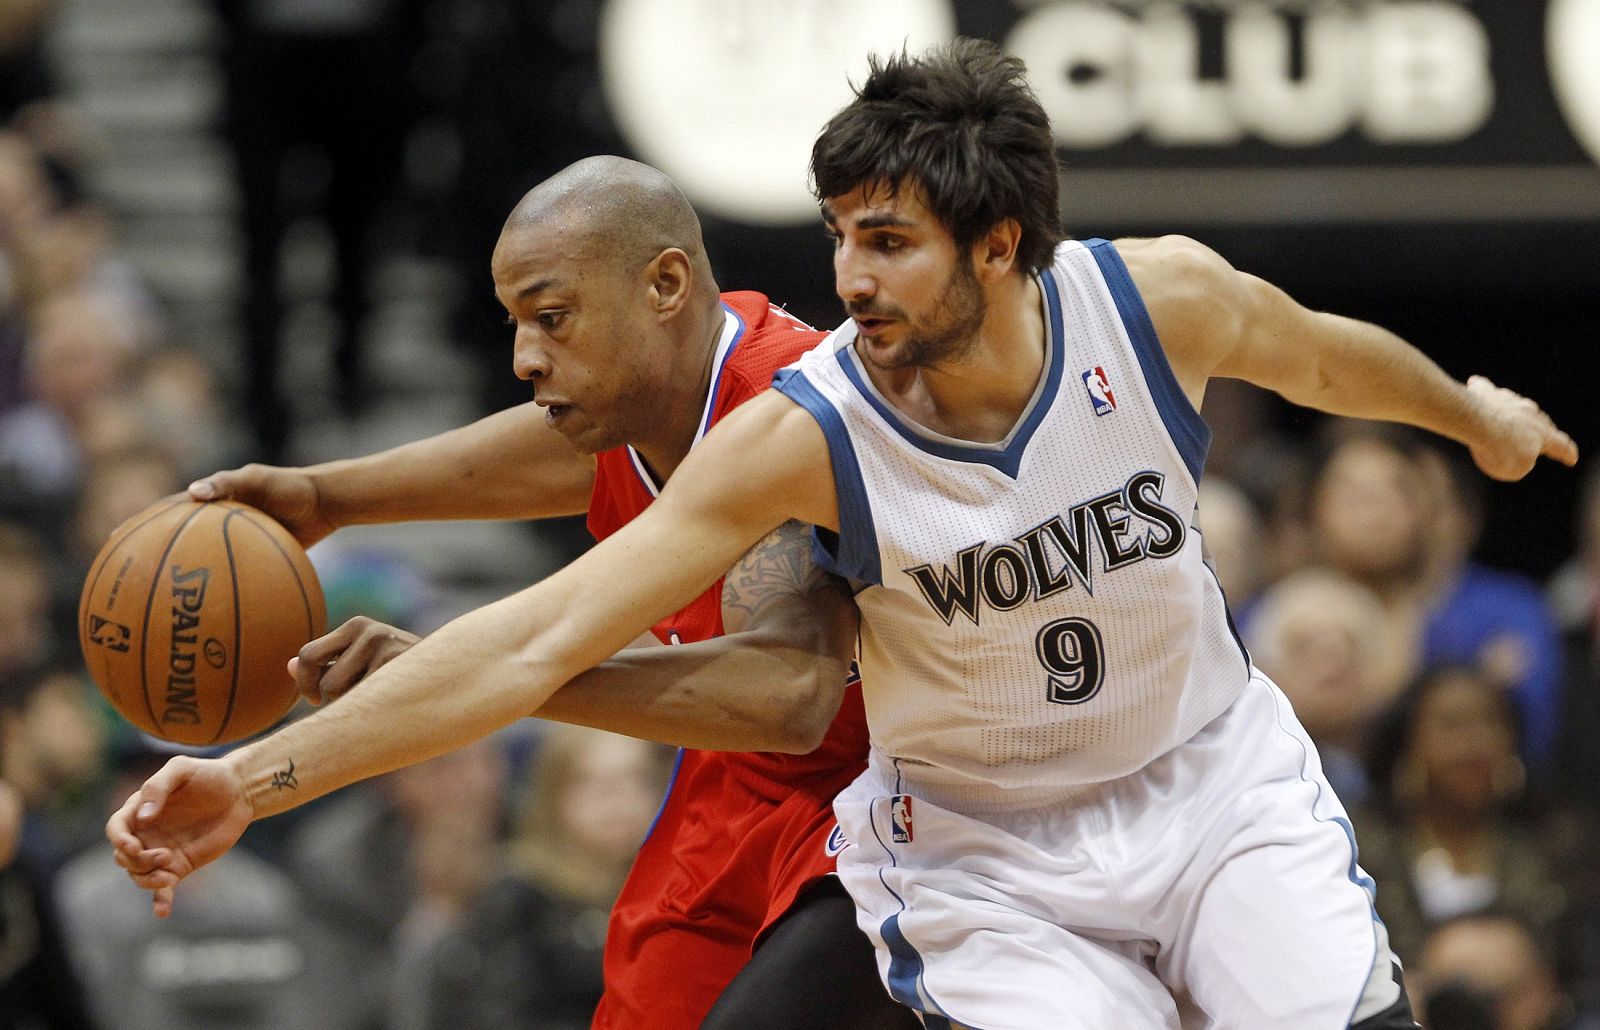 L.A. Clippers forward Caron Butler is fouled by Minnesota Timberwolves guard Ricky Rubio during the second half of their NBA basketball game in the Target Center in Minneapolis,